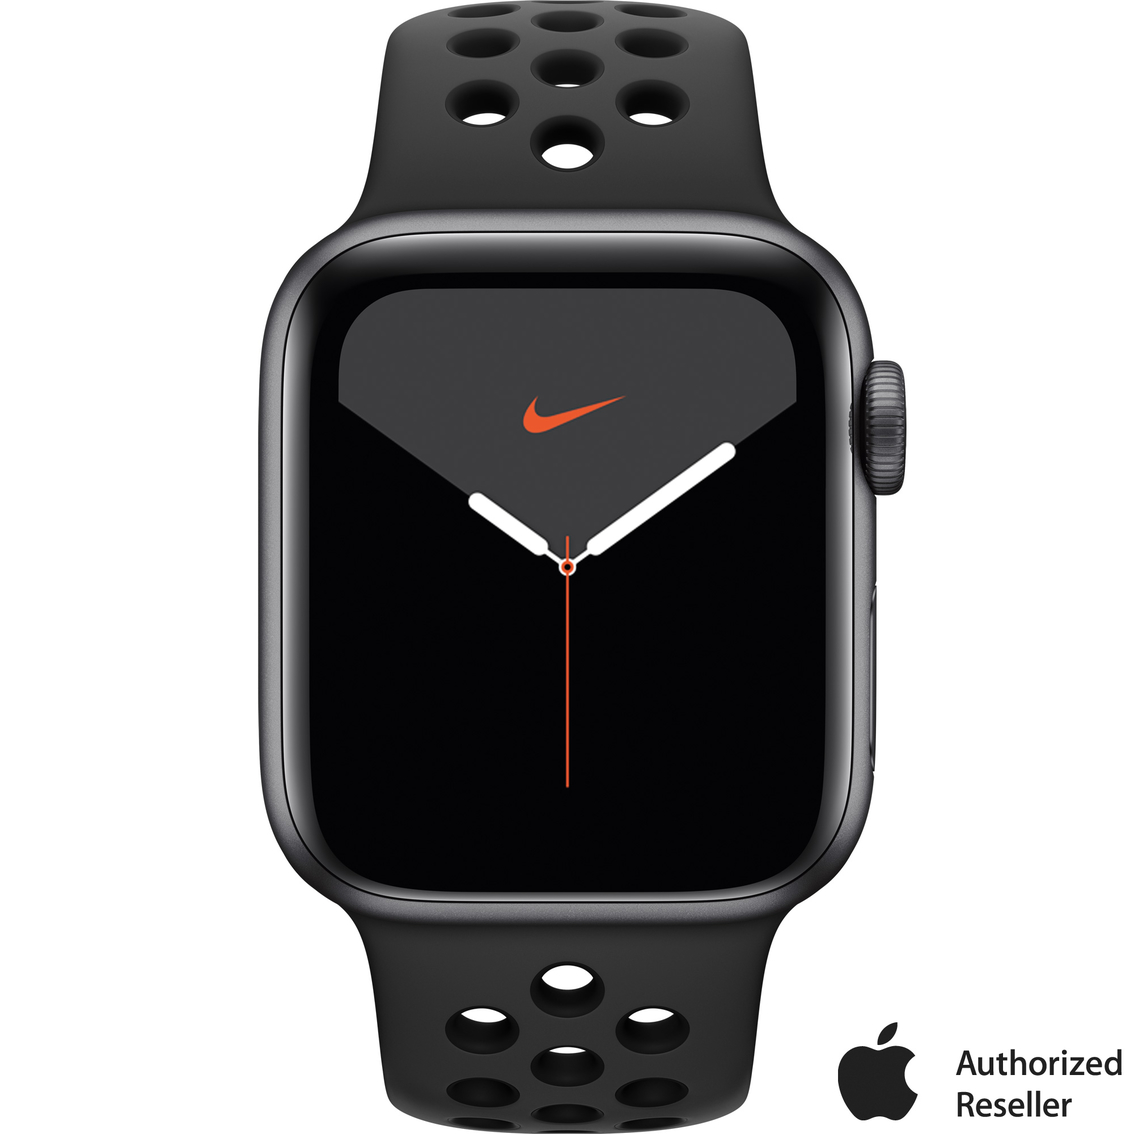 apple watch nike series 5 features